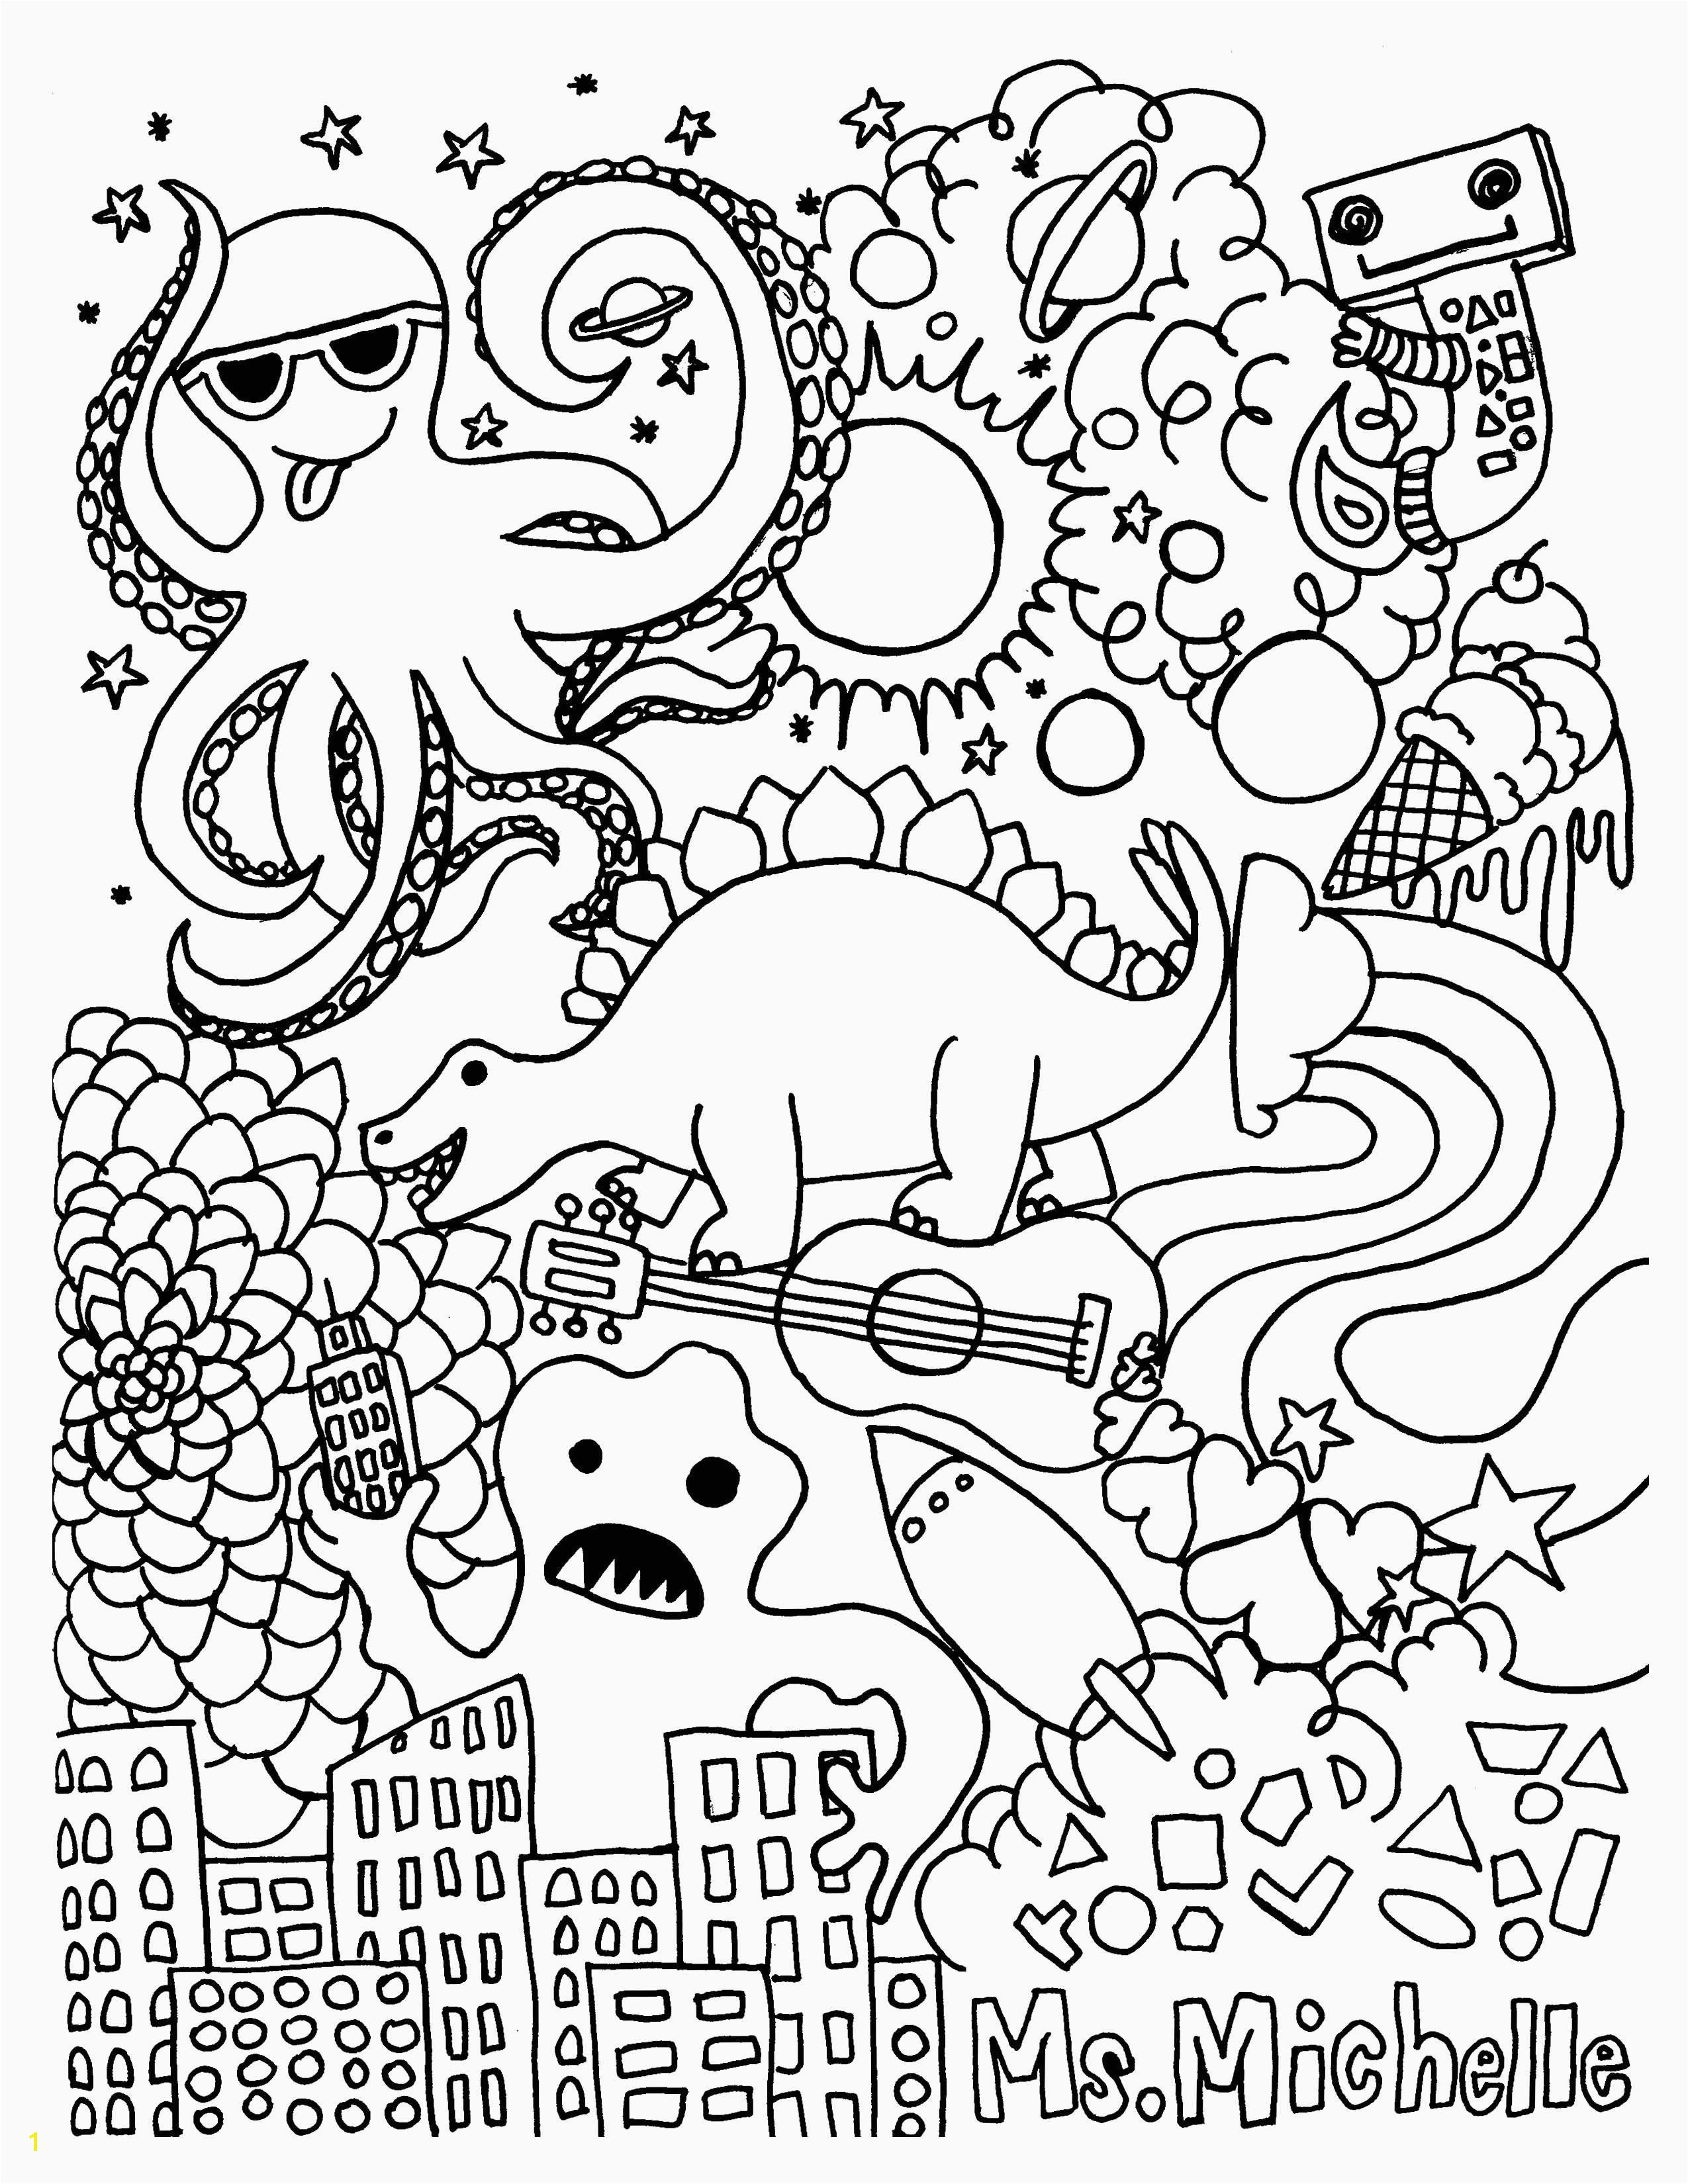 Mermaid Coloring Pages Free Coloring Pages for Halloween Unique Best Coloring Page Adult Od 6r